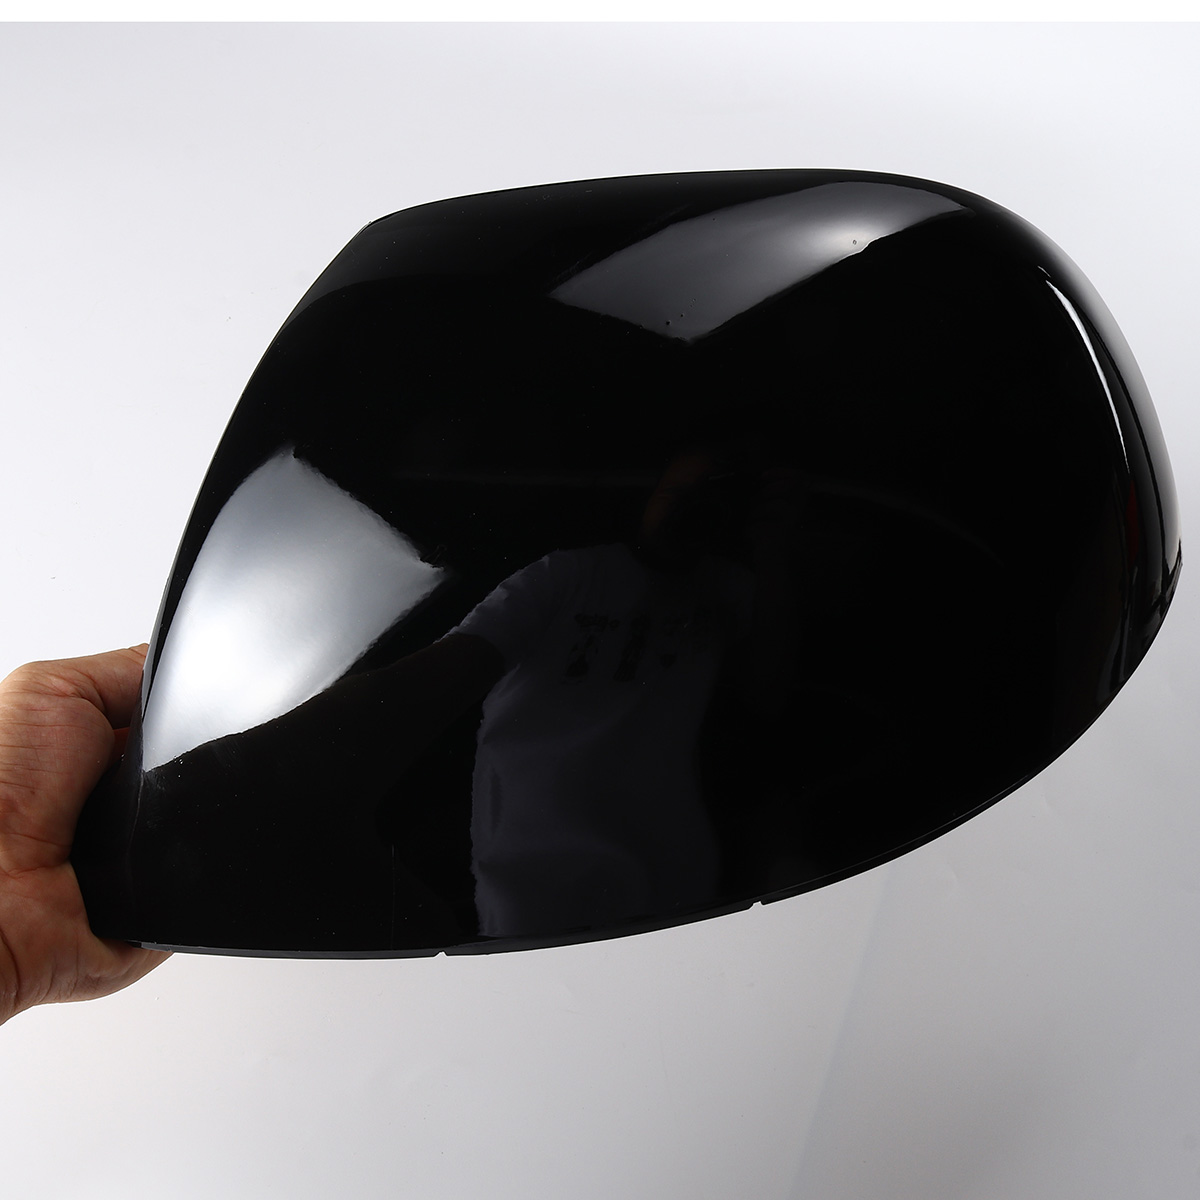 Left Rear View Mirror Cap Cover Glossy Black Replacement for Volkswagen Transporter T5 T5.1 T6